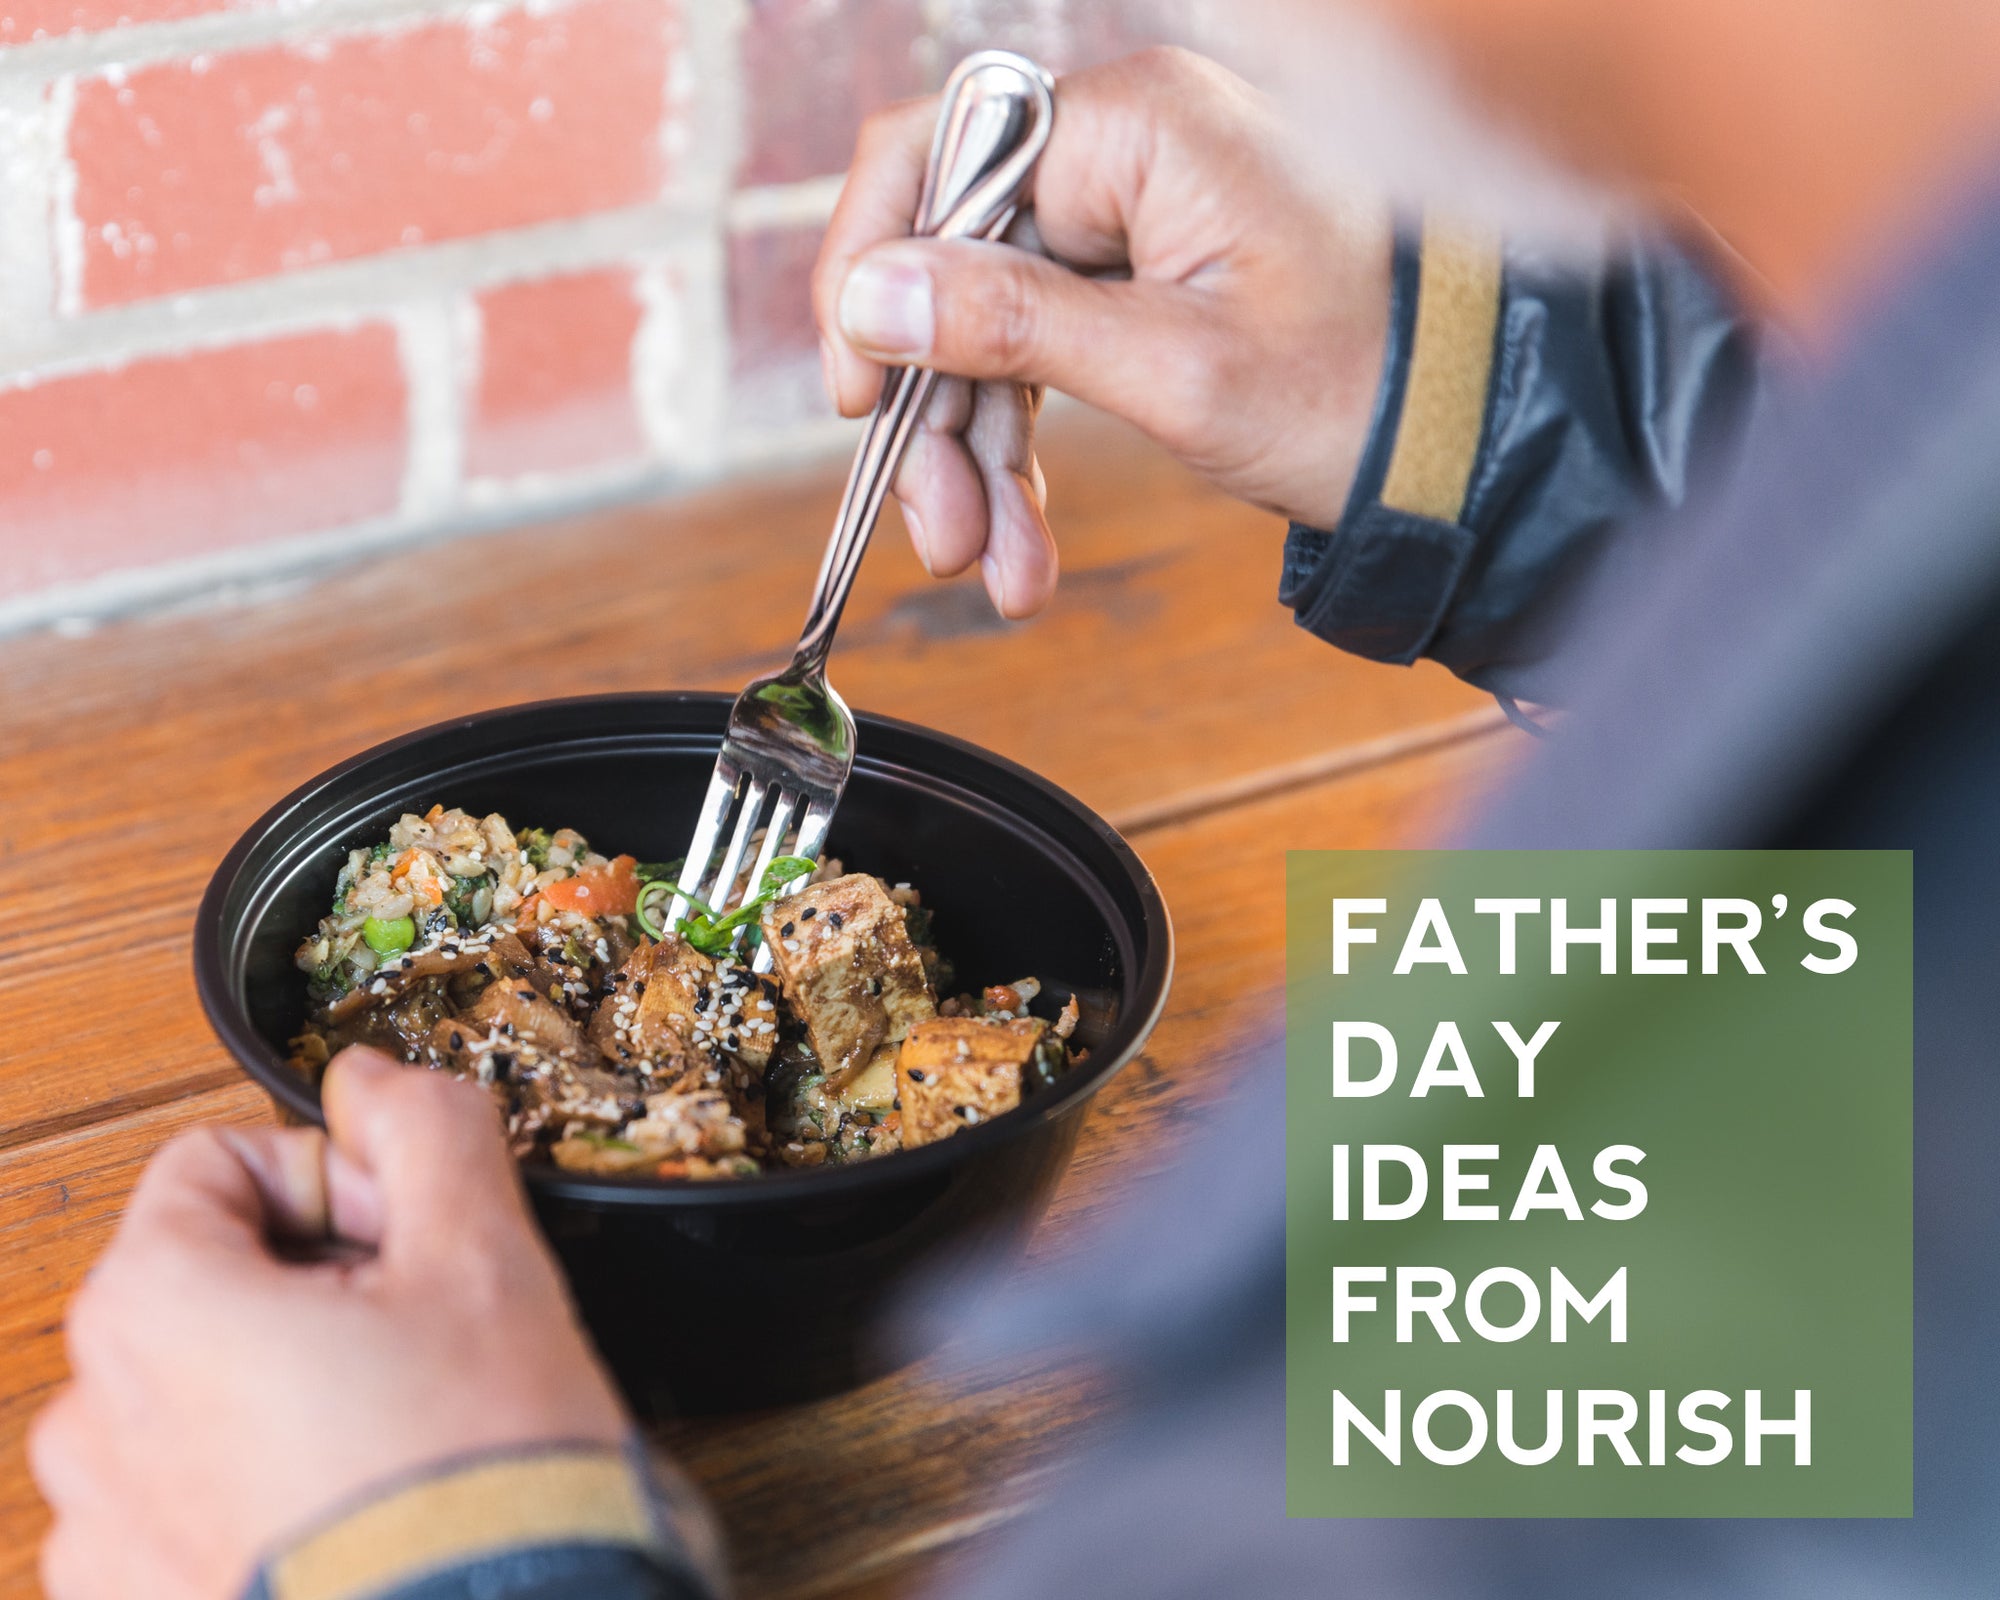 Father's Day is just around the corner. Here are some of our favorite dad-friendly local products and services!